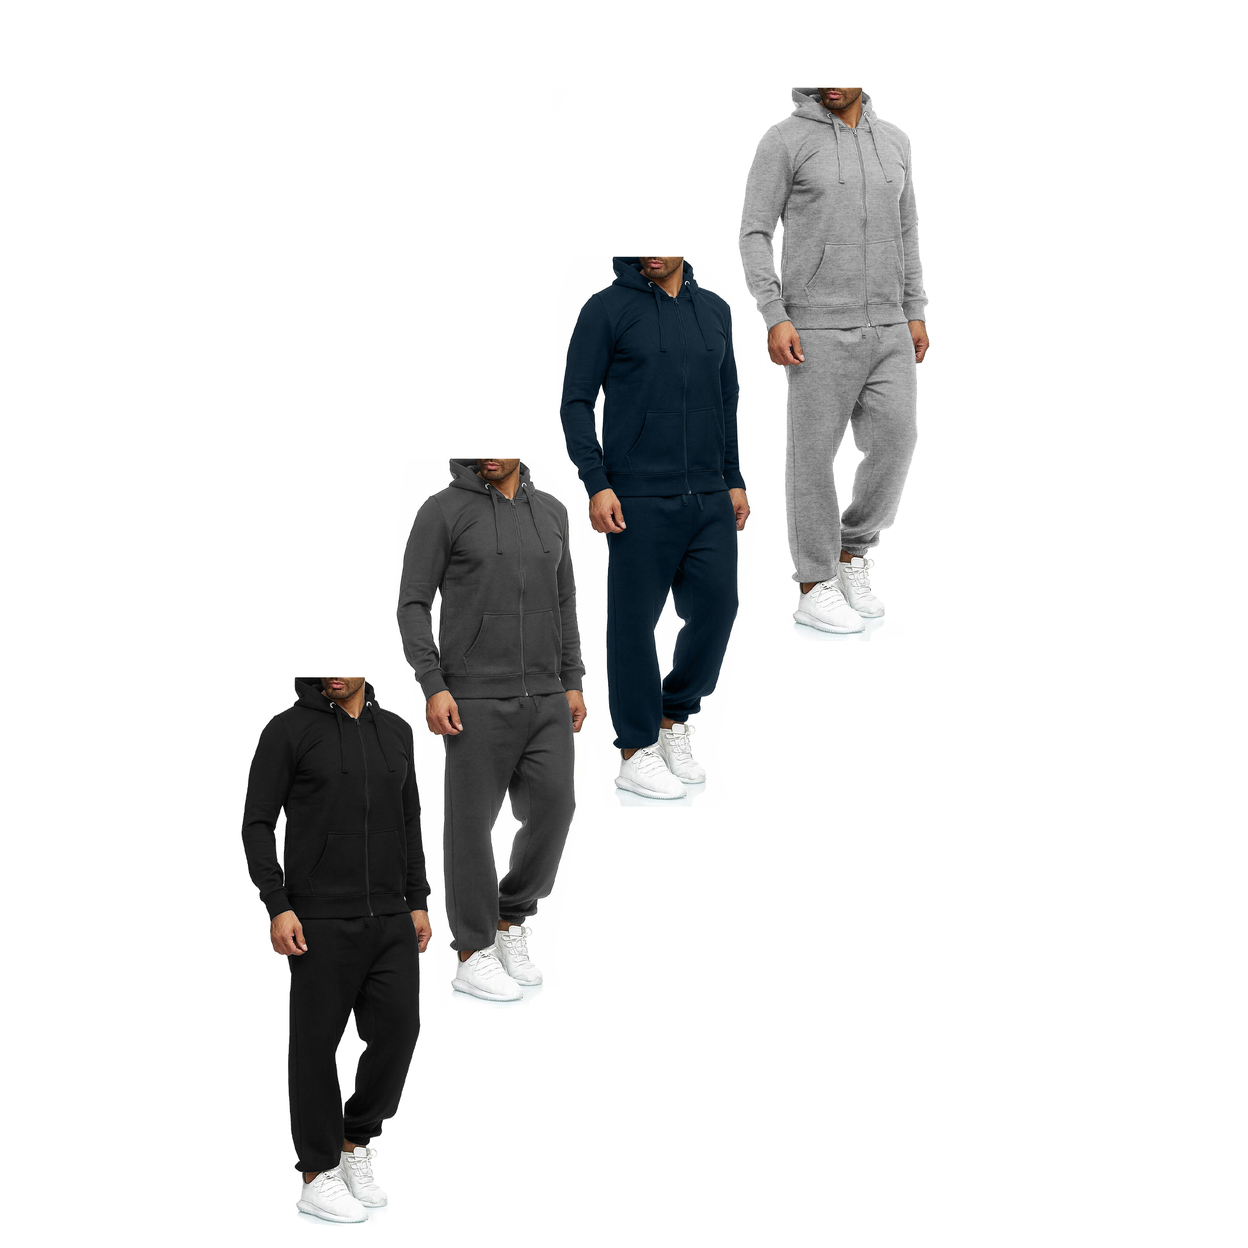 2-Pack: Men's Casual Big & Tall Athletic Active Winter Warm Fleece Lined Full Zip Tracksuit Jogger Set - Navy, Small